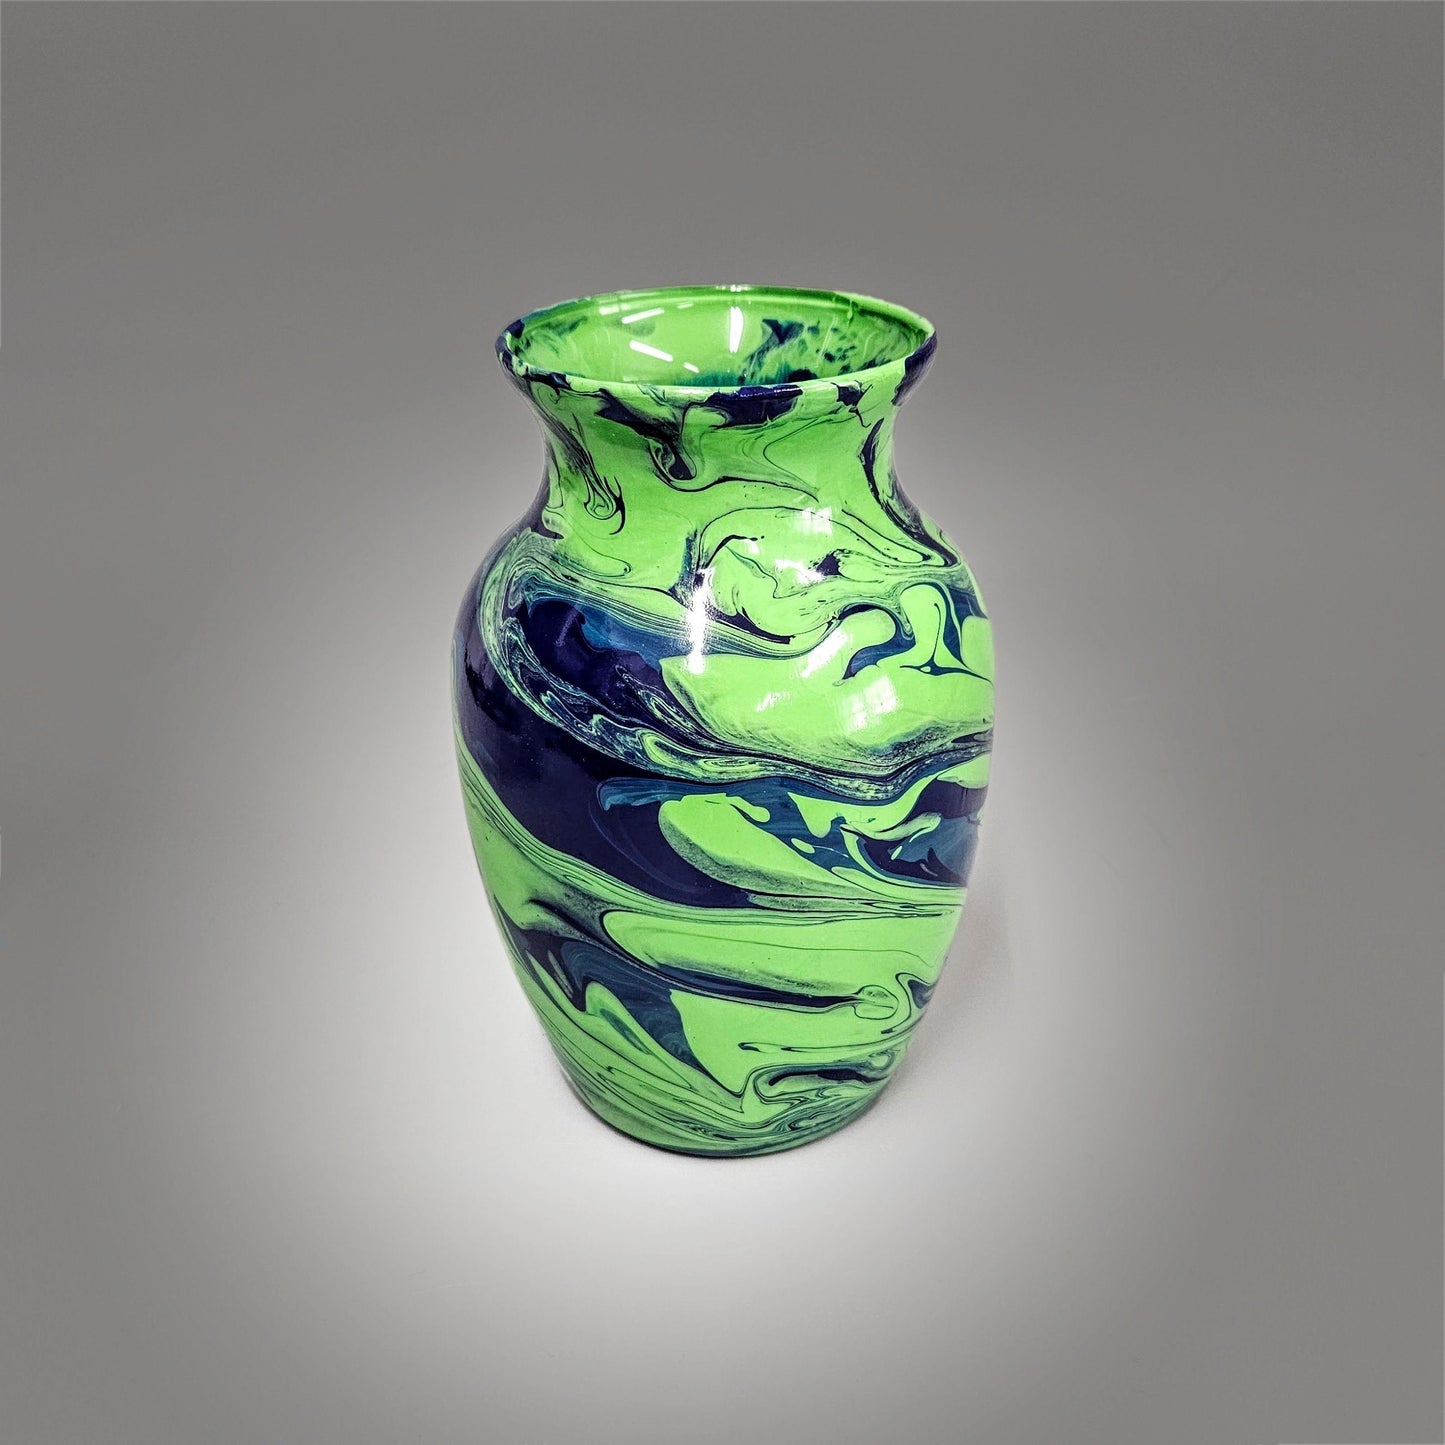 Painted Glass Vase in Spring Green and Navy Blue